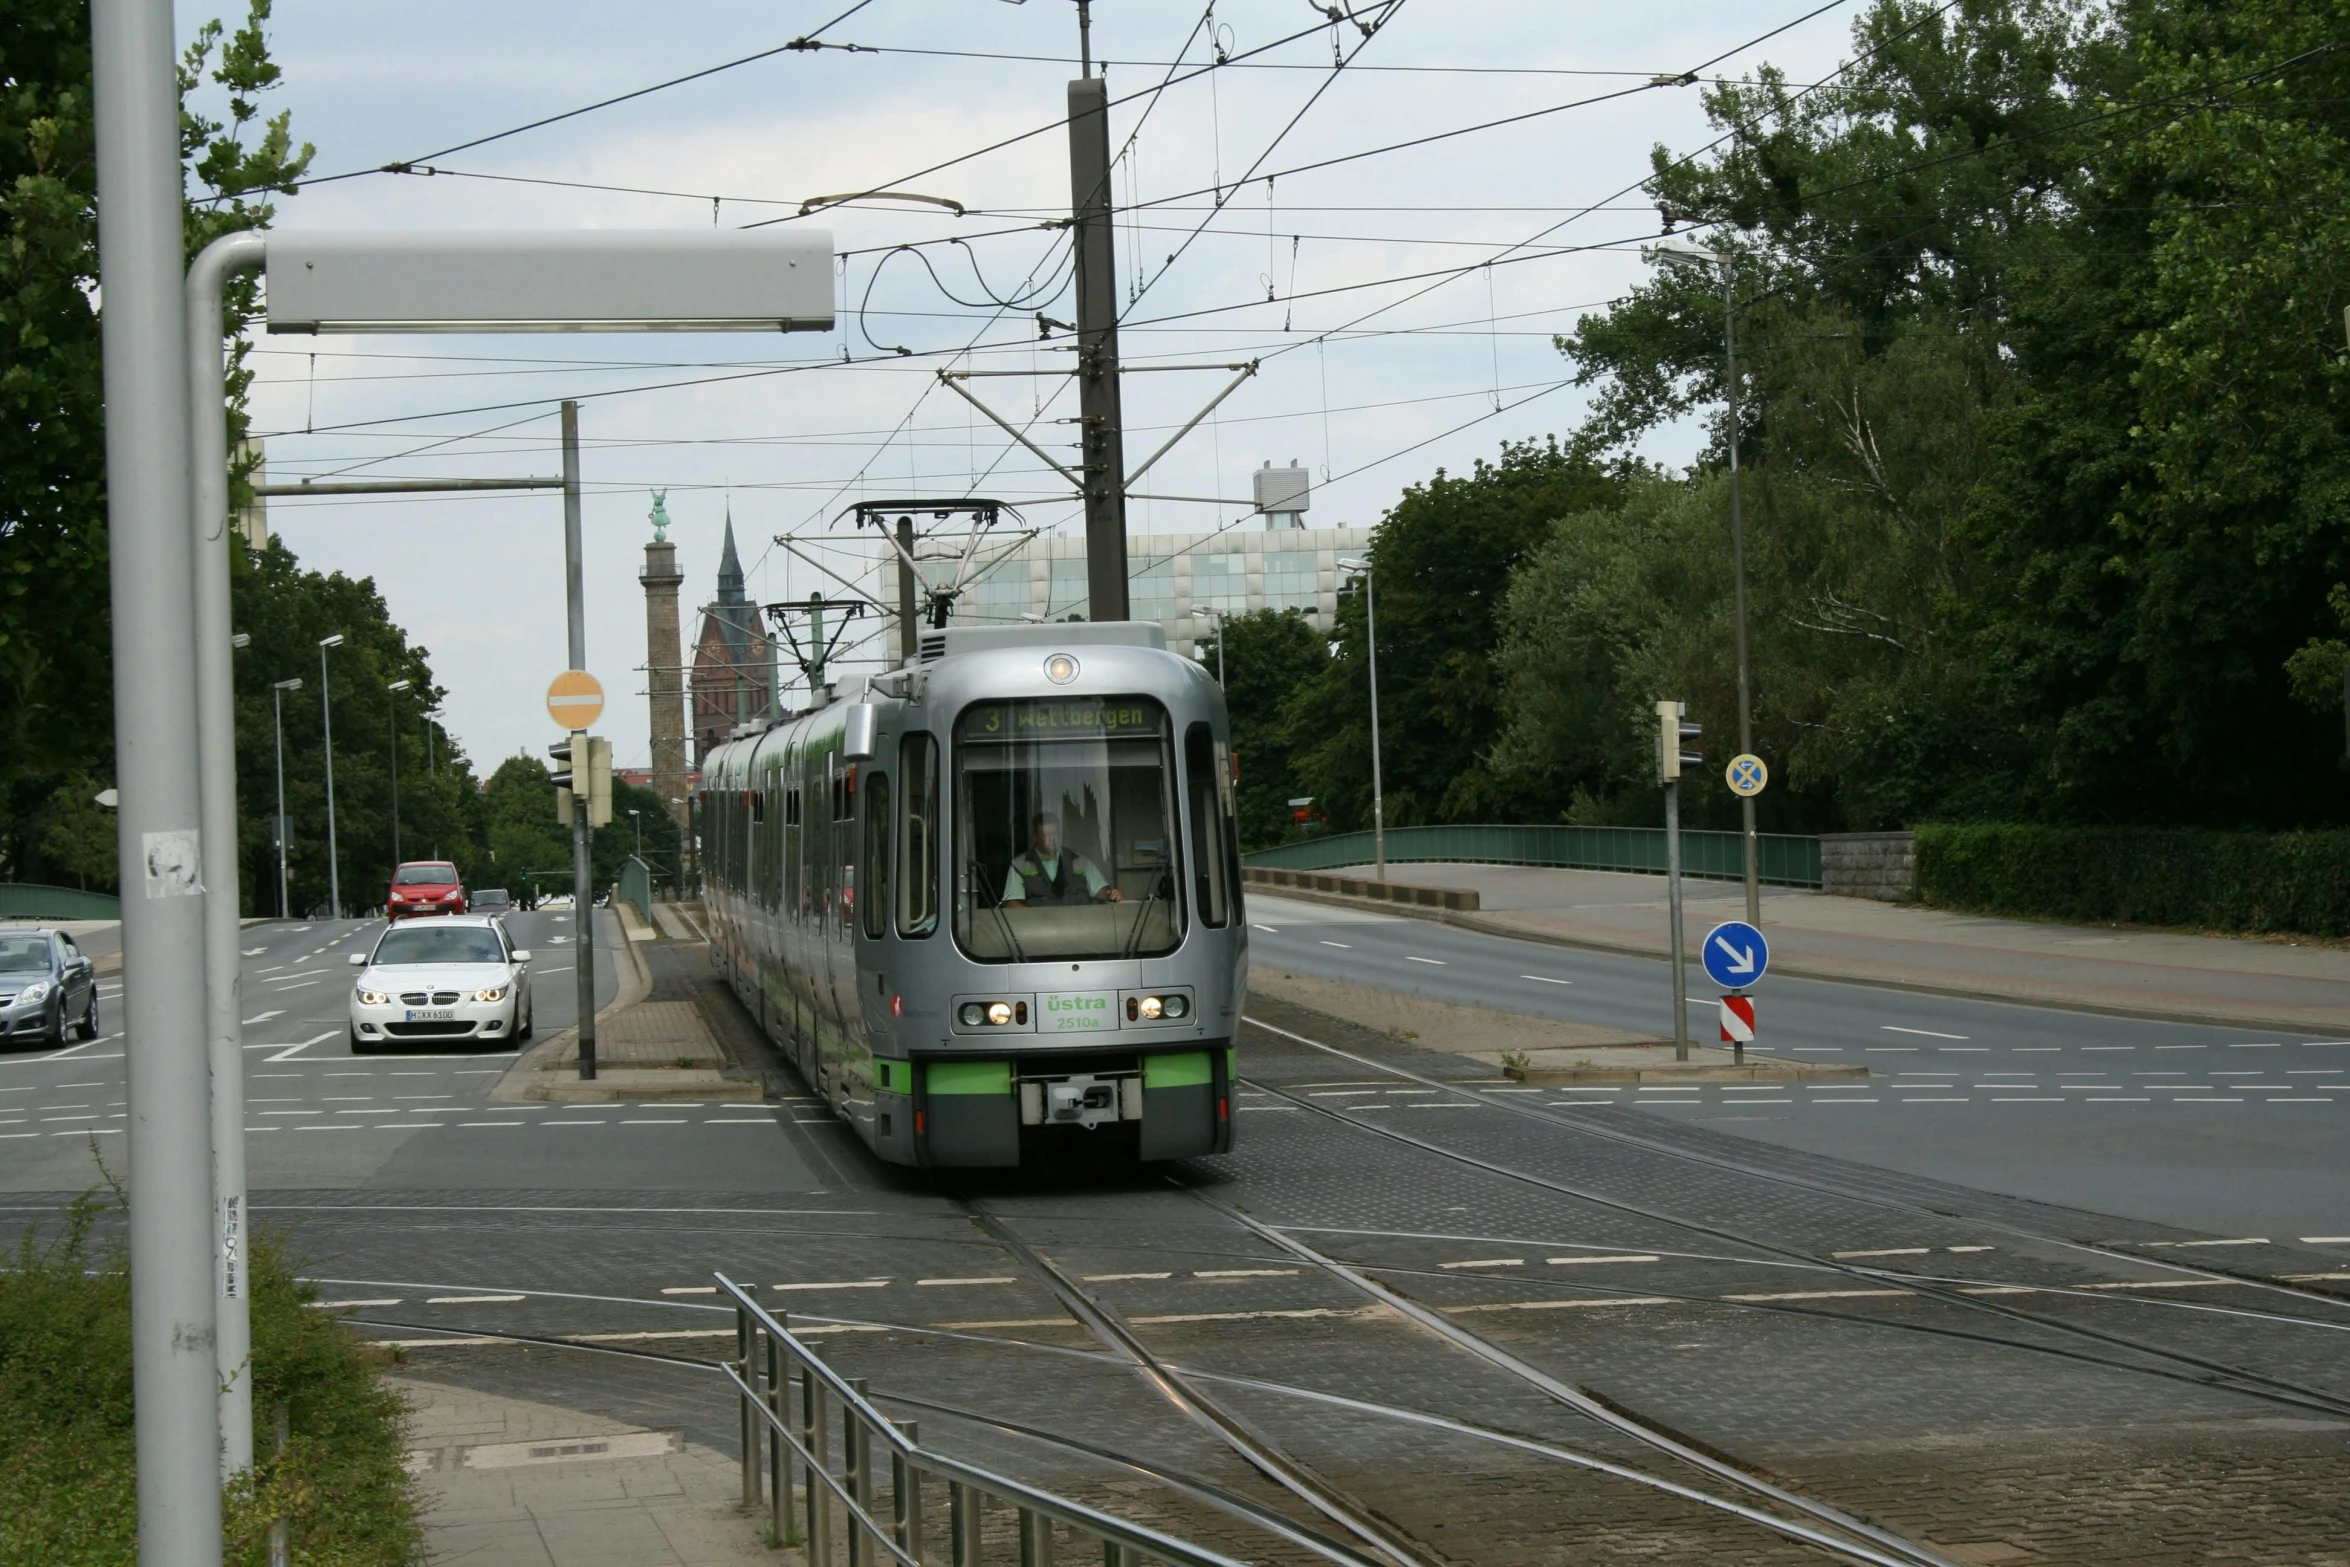 a passenger train on the tracks at an intersection